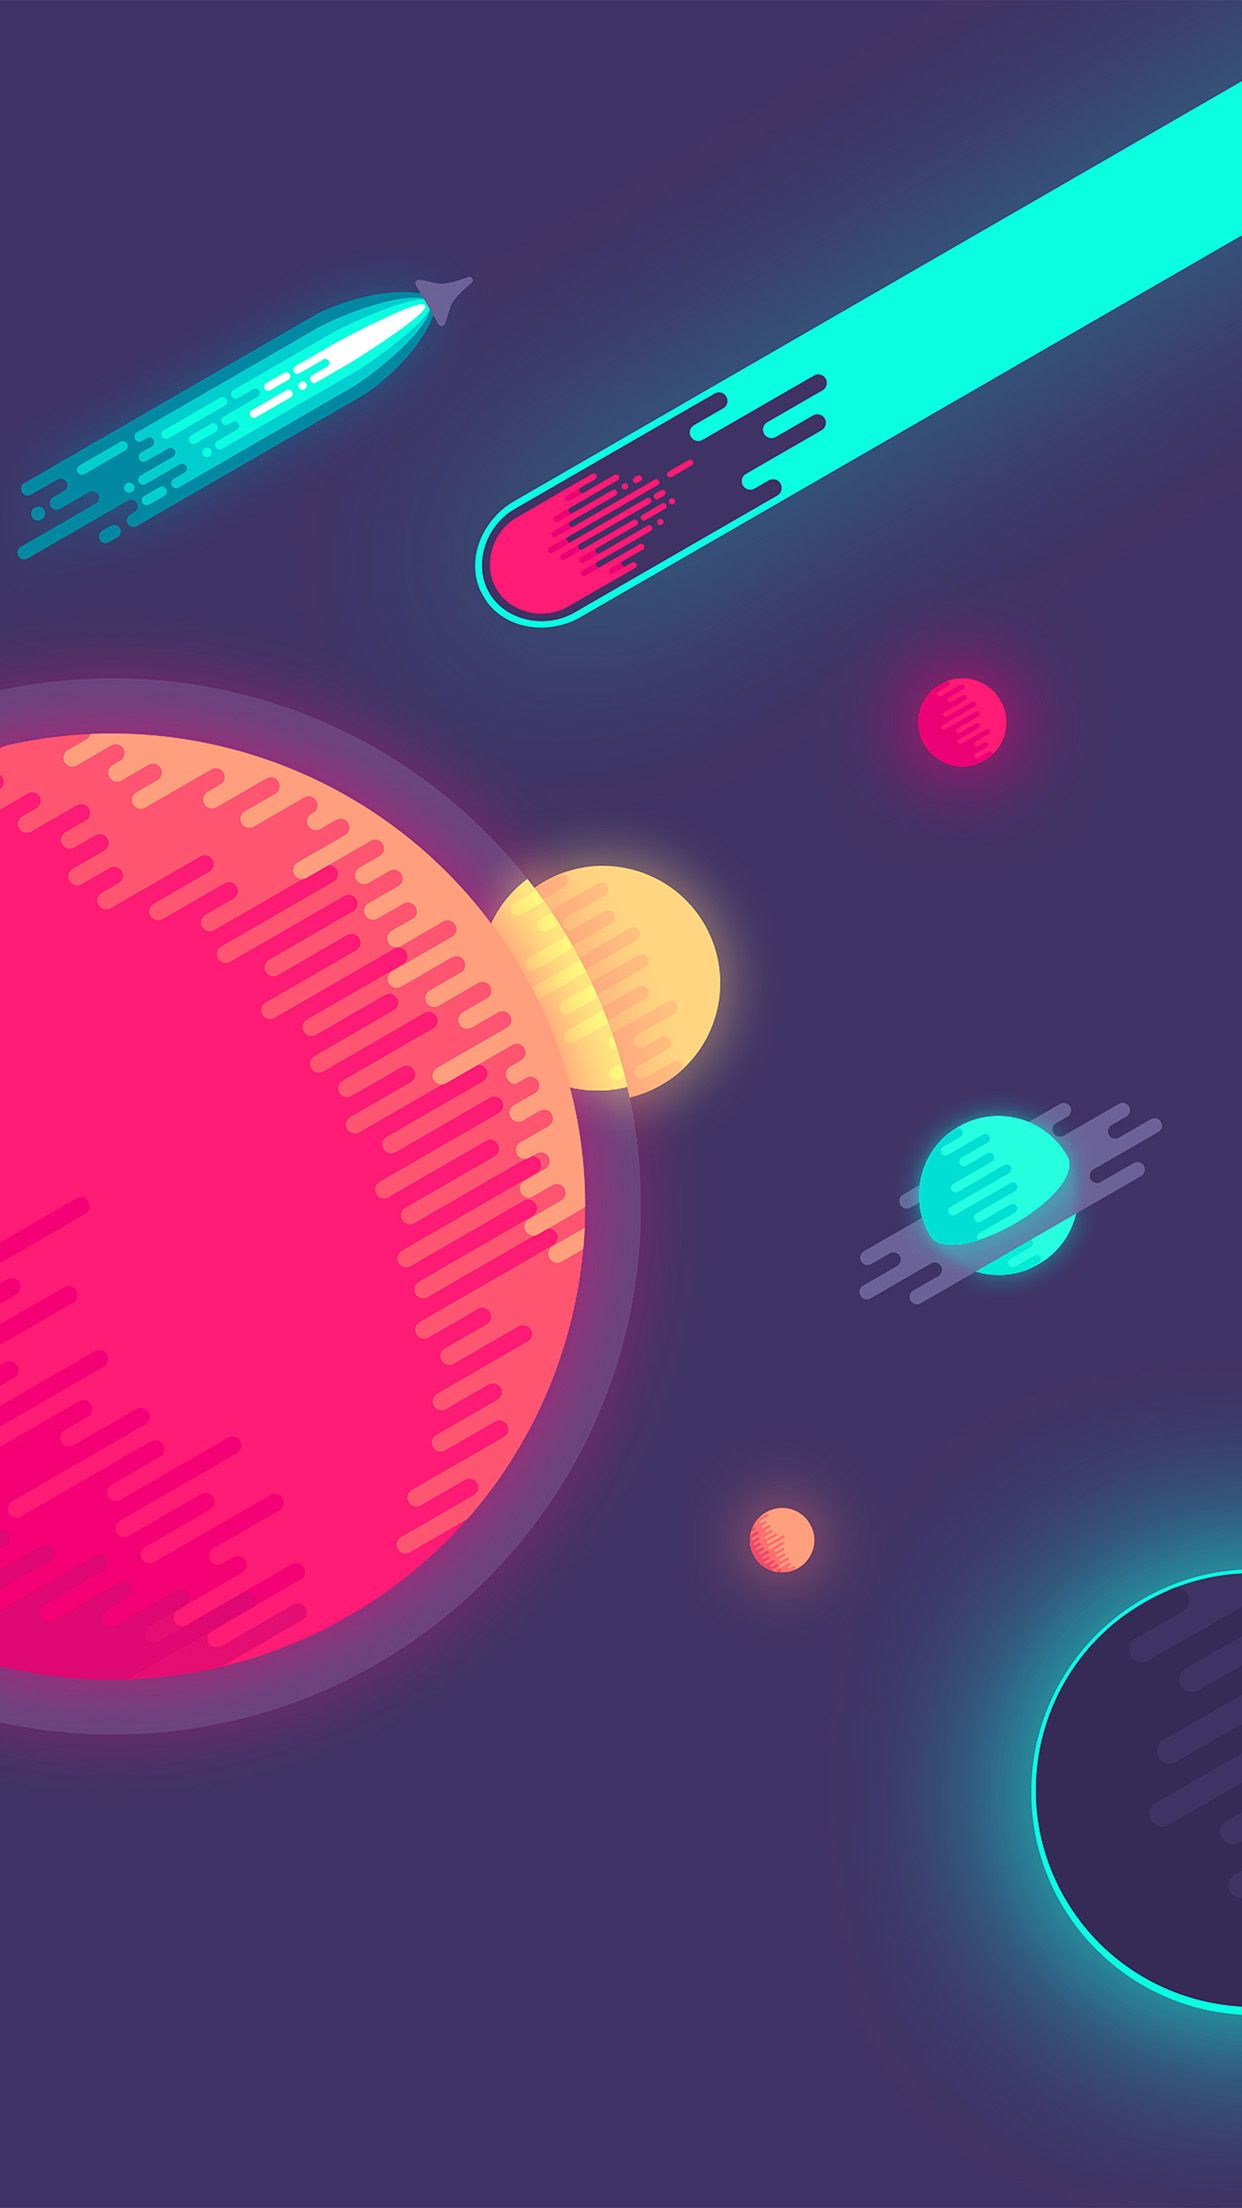 Space Minimal Art Illustration Android .androidhdwallpaper.com